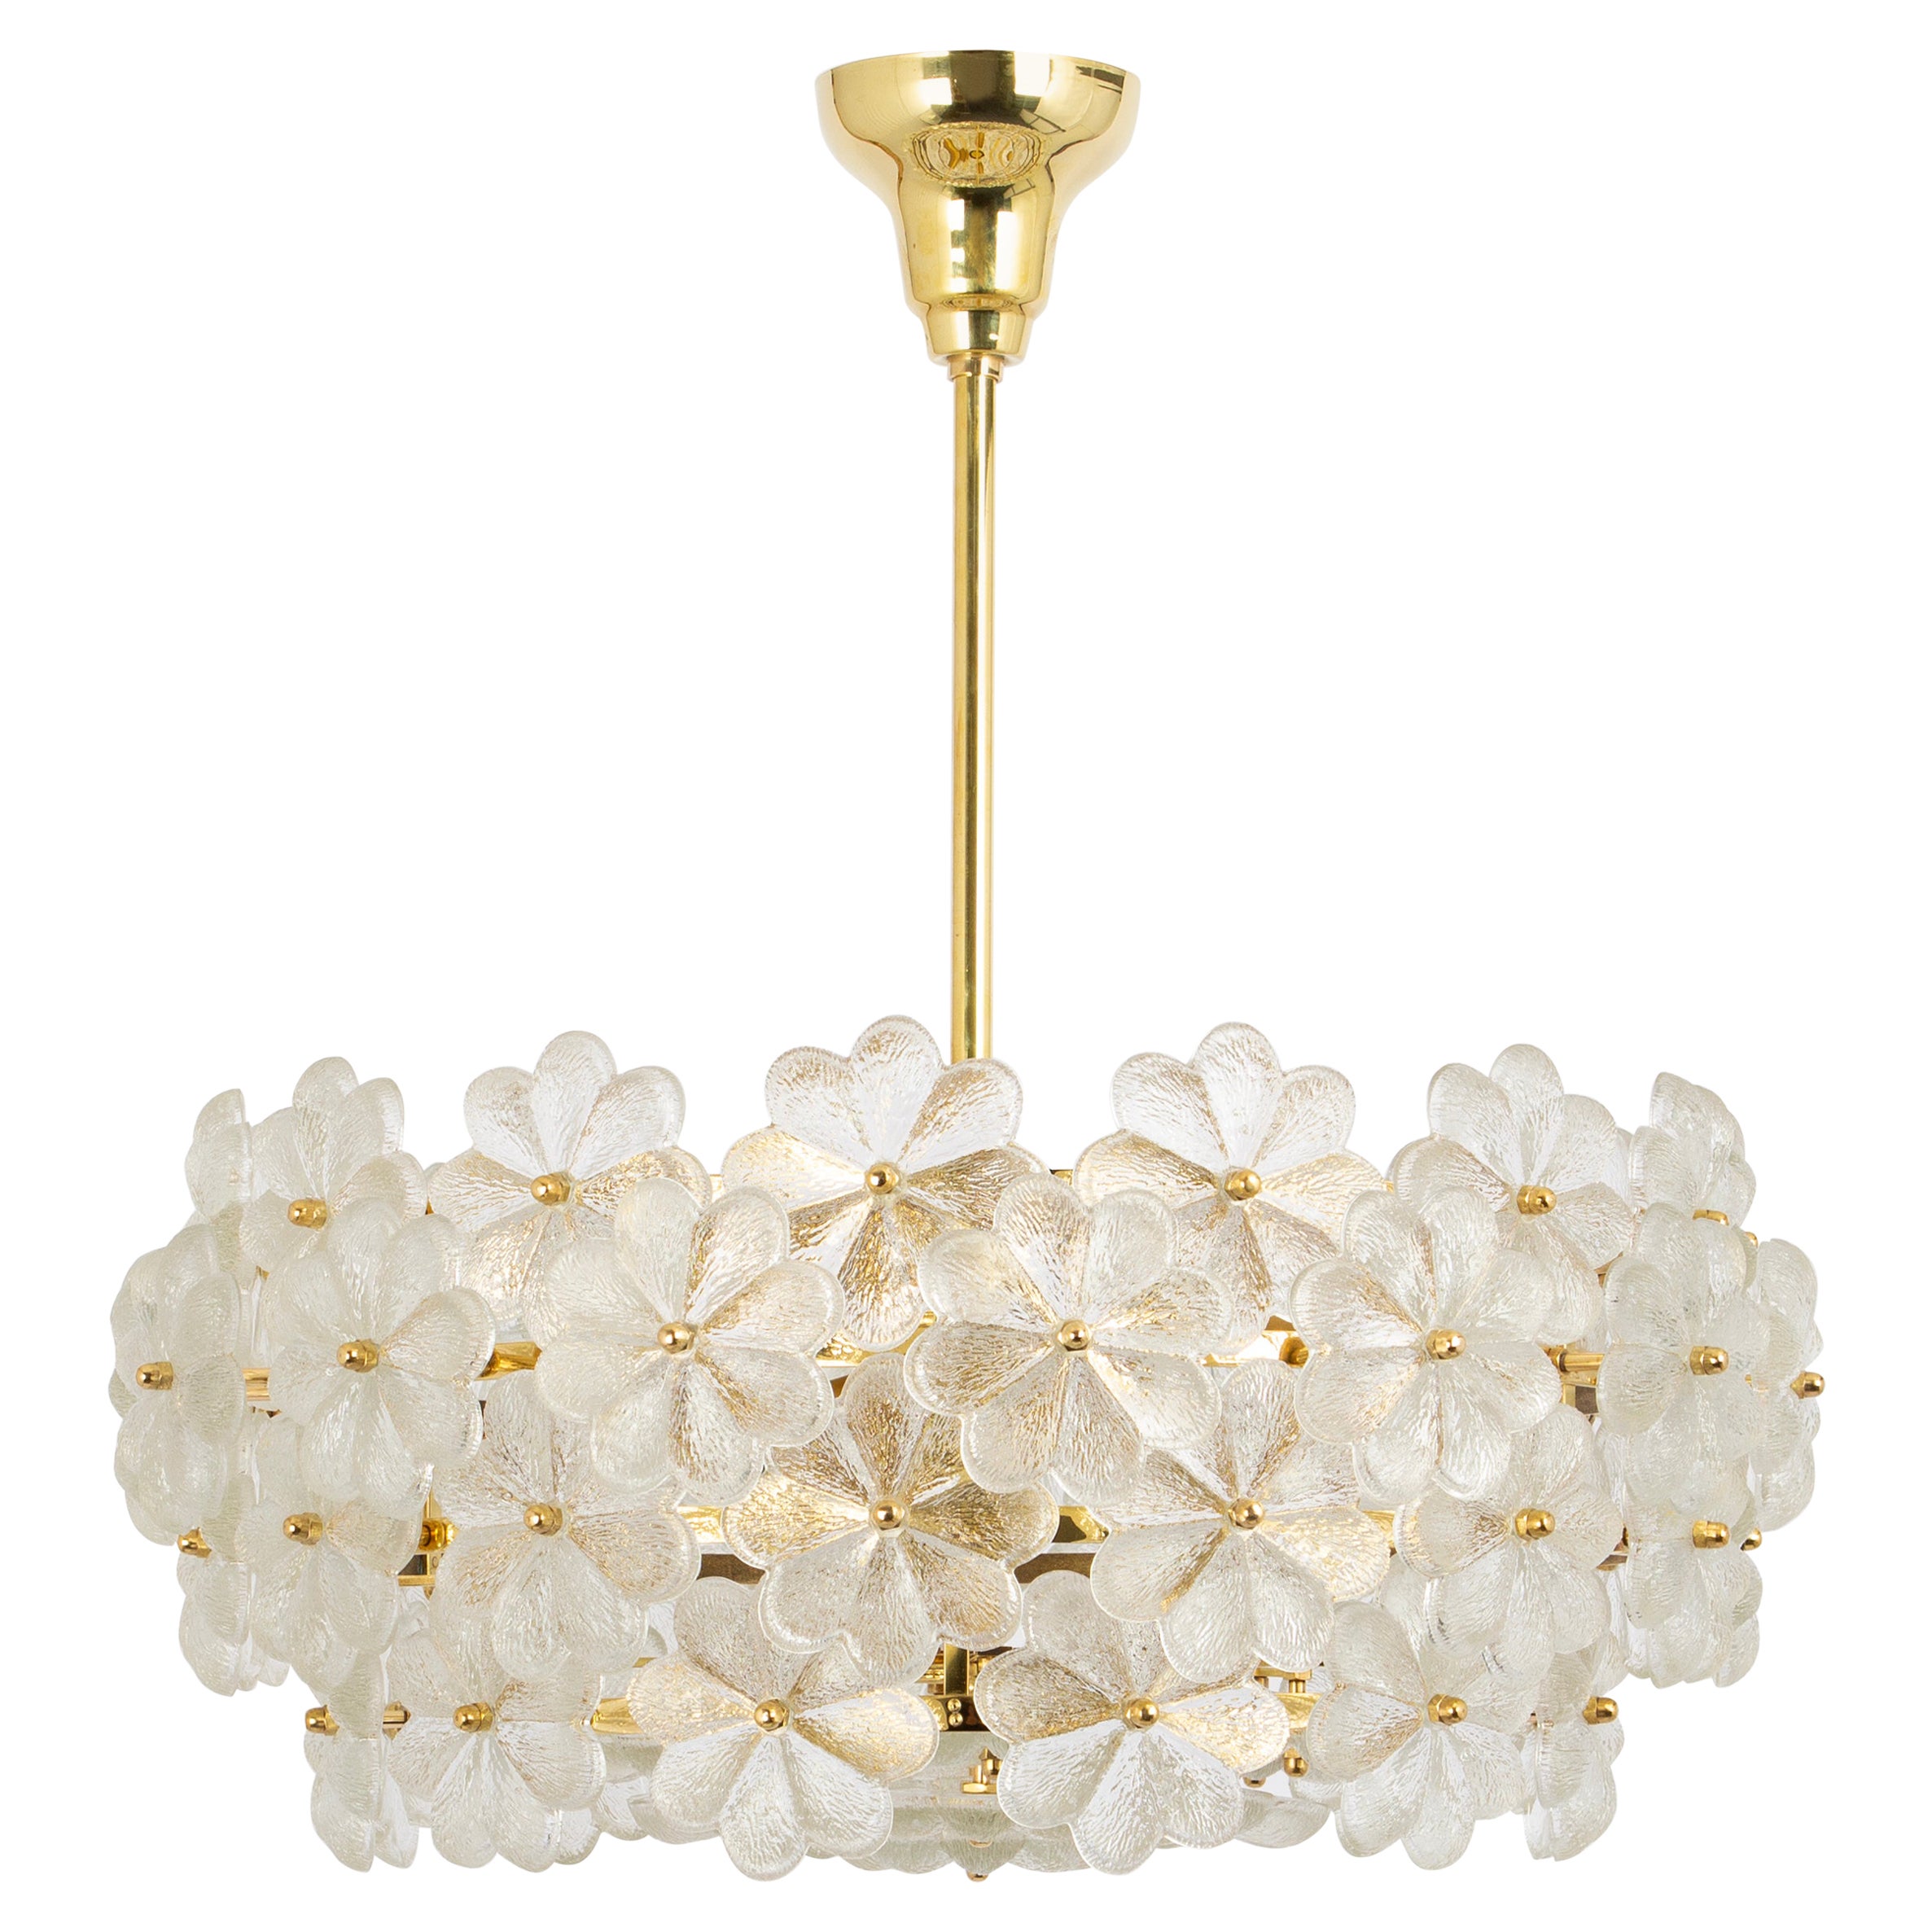 Stunning Murano Glass Chandelier by Ernst Palme, Germany, 1970s